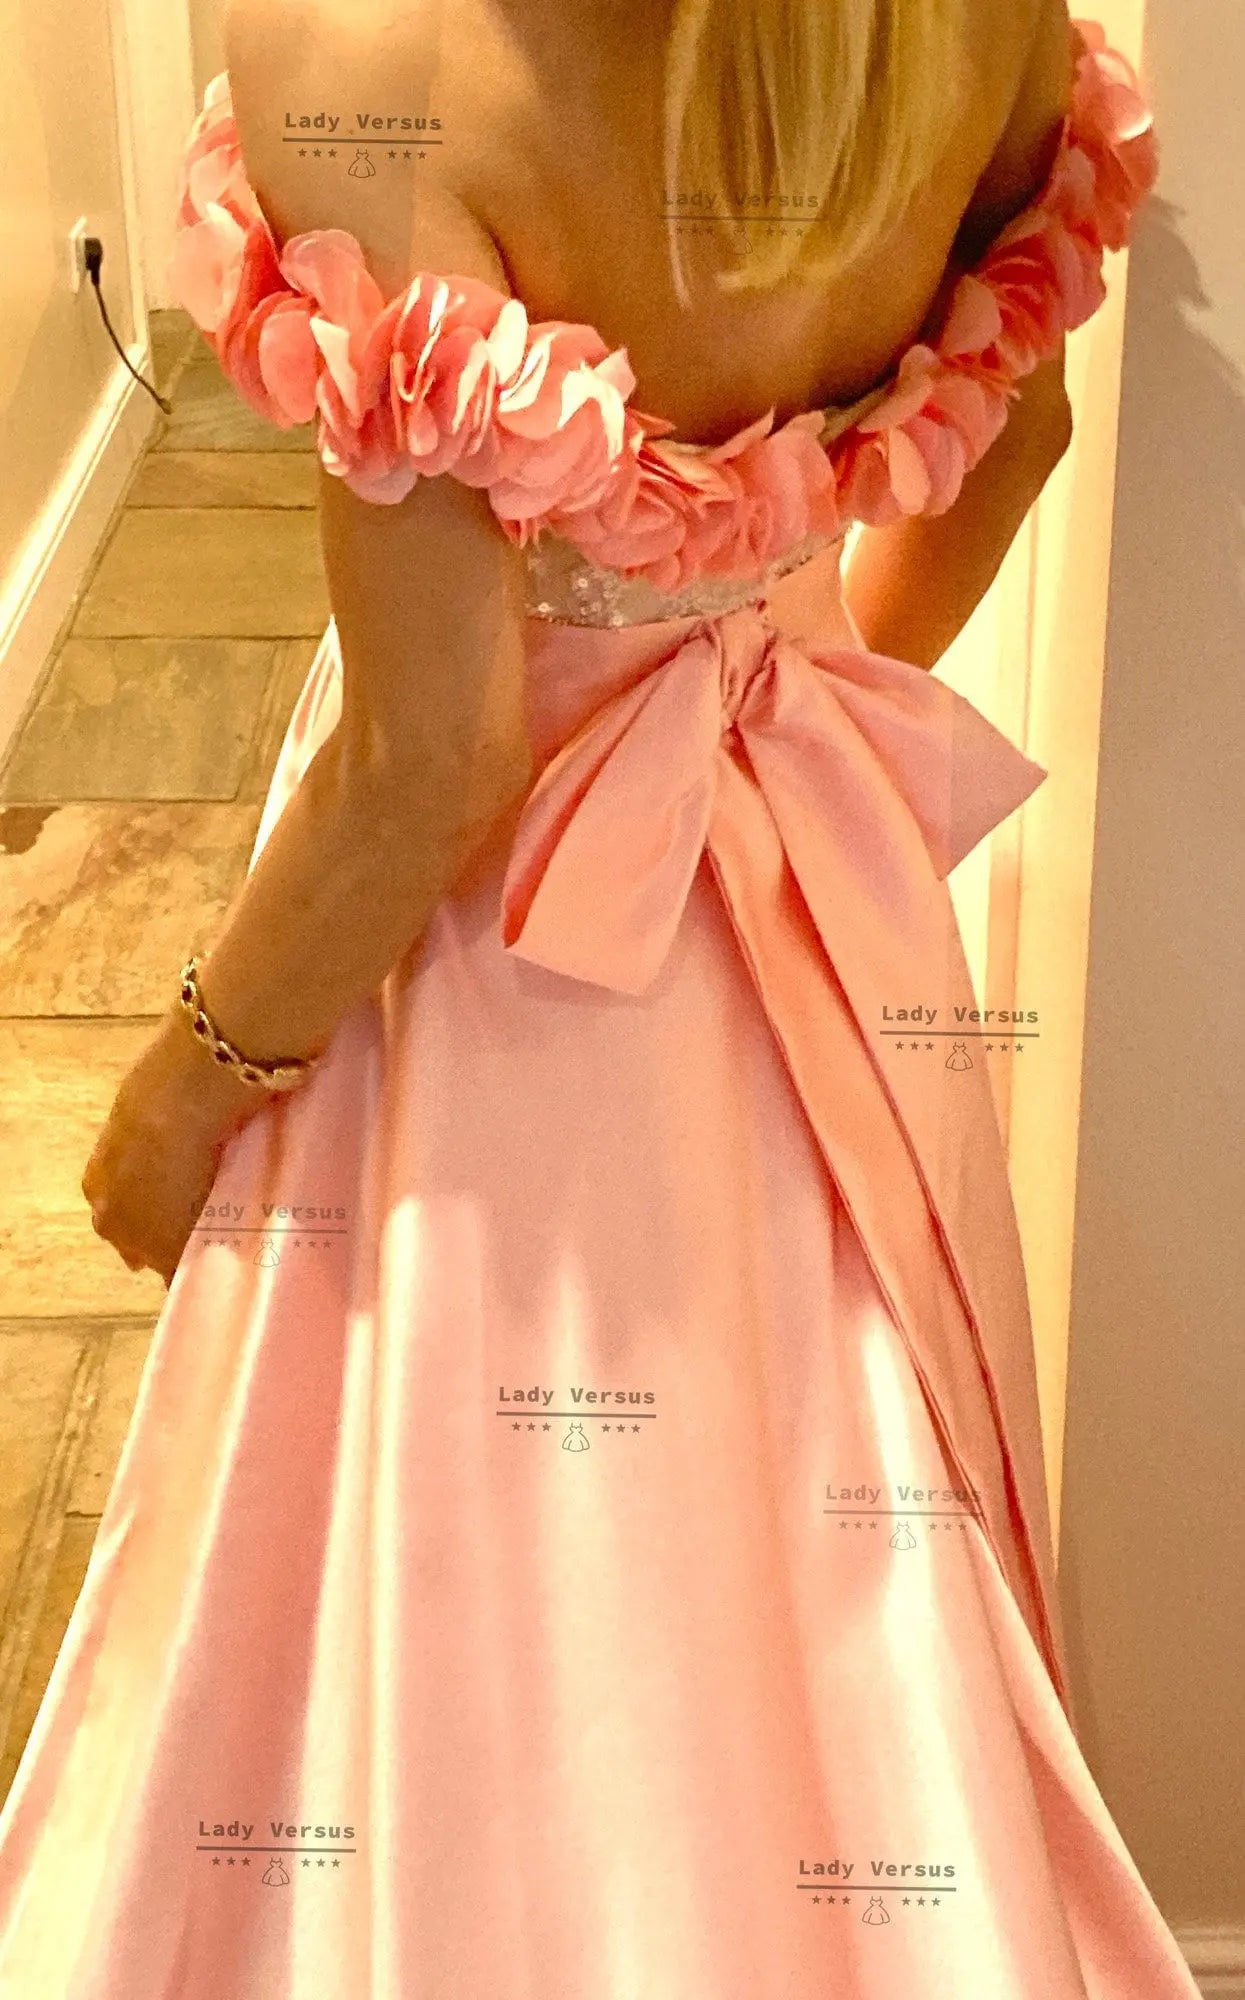 Prom dress Pink Satin dress with train / Bridesmaids dress/ Homecoming dress/ Occasional dress/Graduation Gown/ Occasion  Dress/ only 1 left Lady Versus